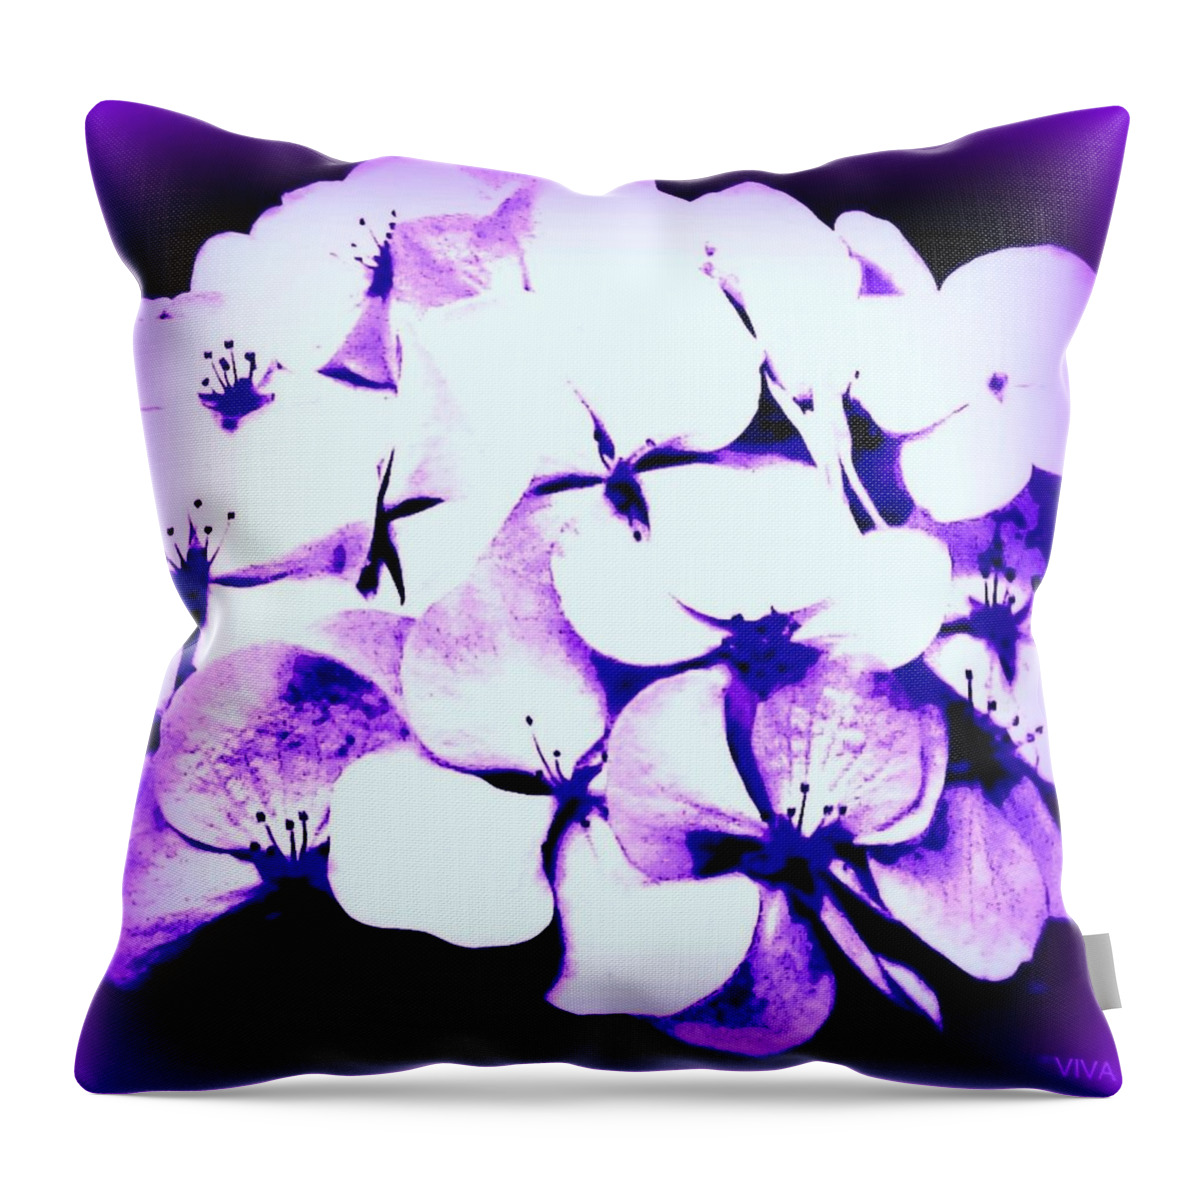 Viva Throw Pillow featuring the photograph Hydrangea Moderne by VIVA Anderson